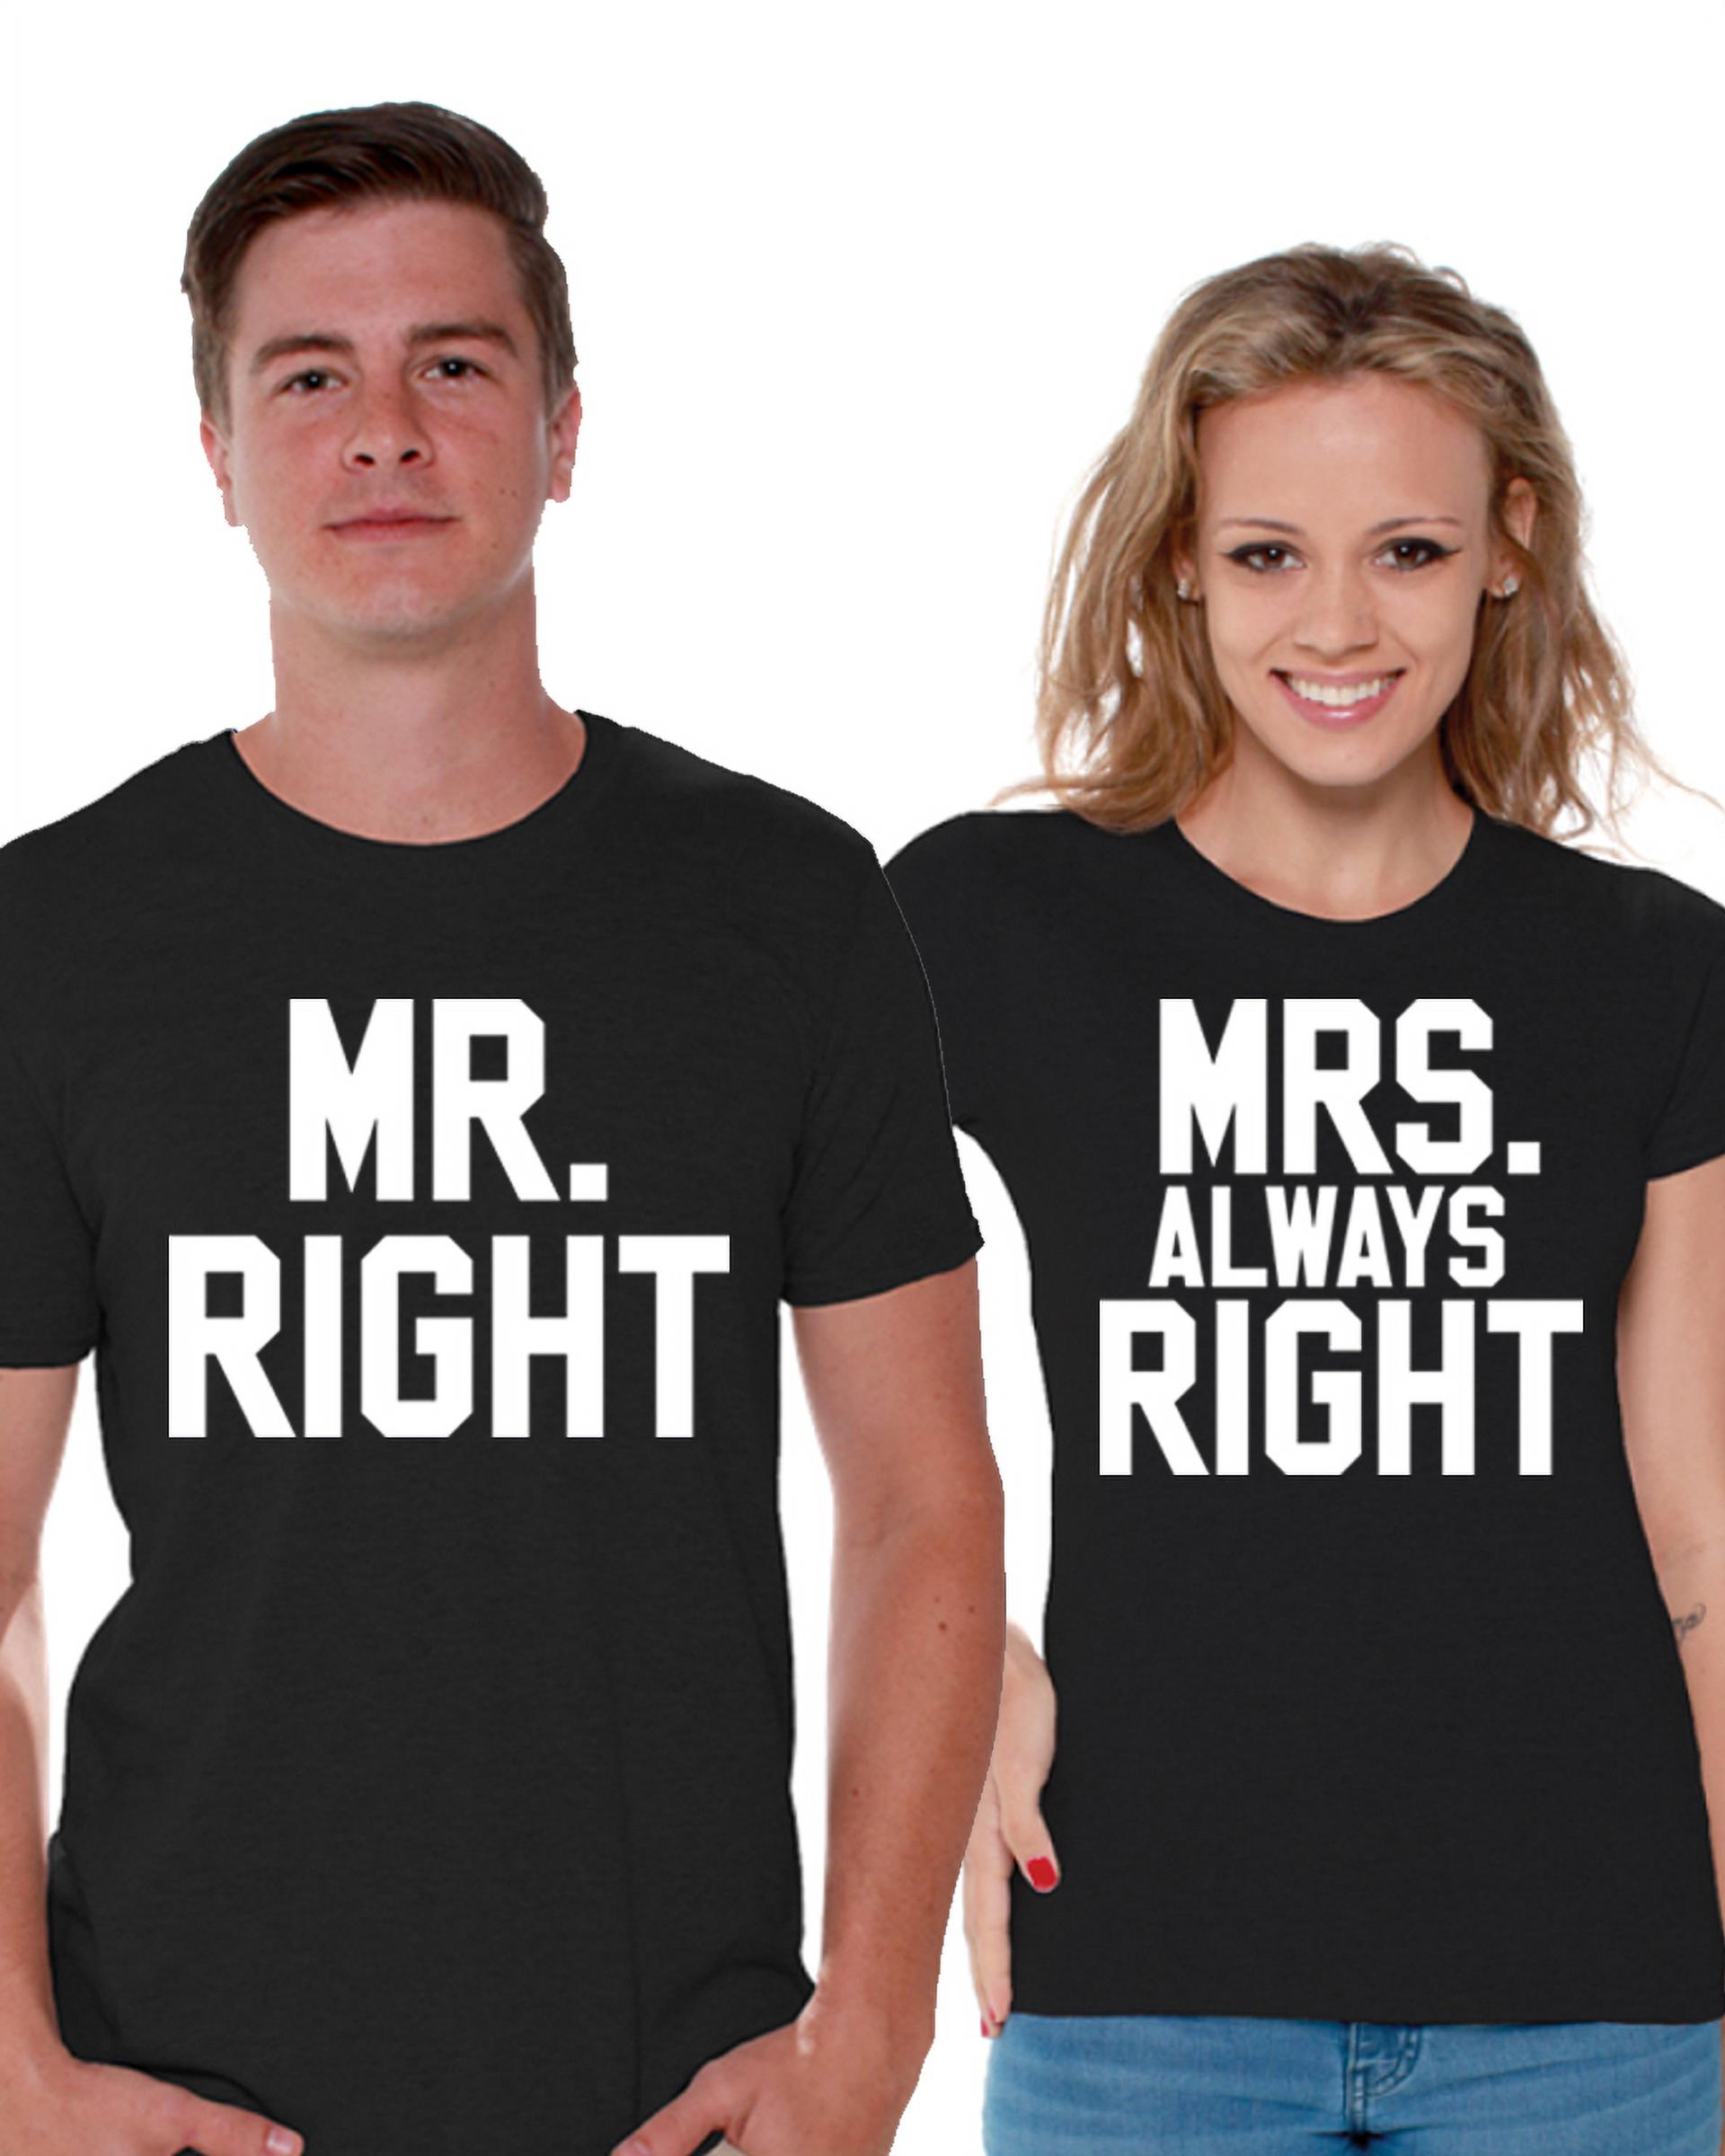 Awkward Styles Mr. Right Mrs. Always Right Couple Shirts Matching Mr and Mrs T Shirts for Couples Valentine's Day Outfit Gift for Husband and Wife Funny Couple Shirts Anniversary Gifts for Couple - image 1 of 5